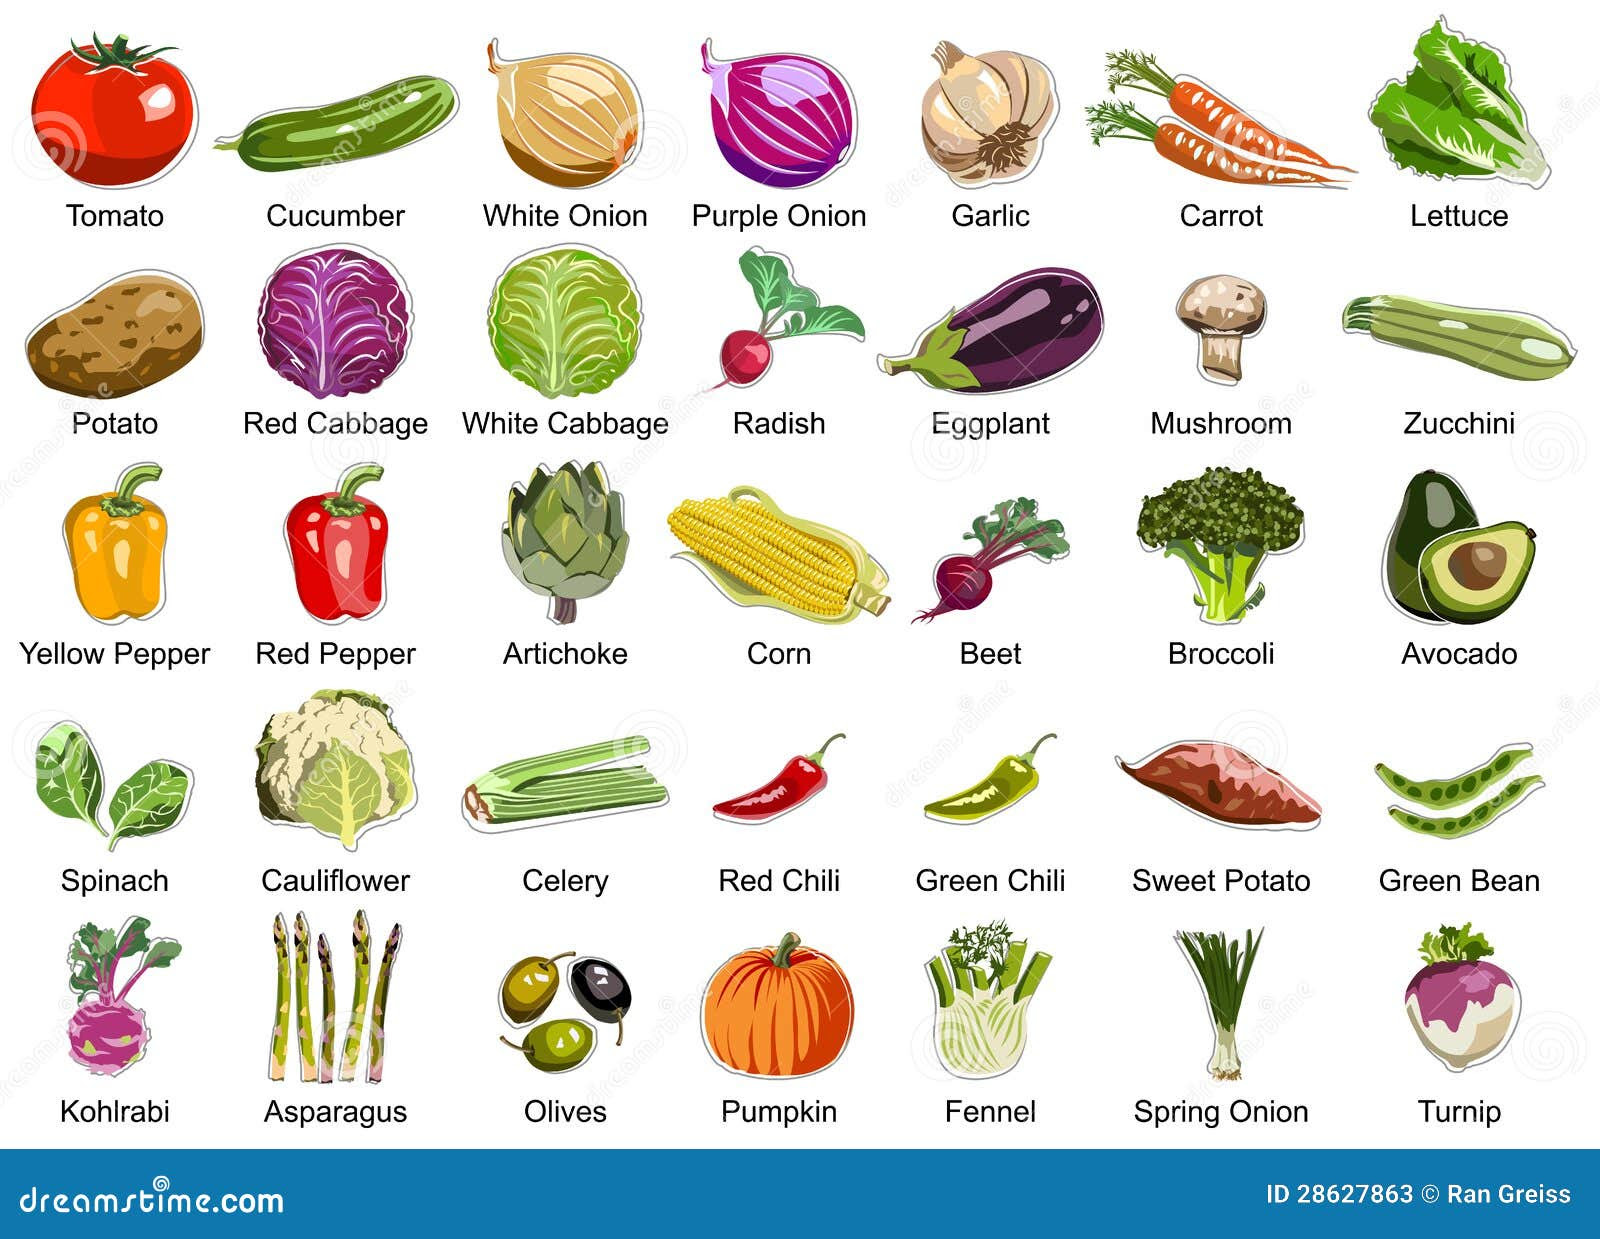 Fruits And Vegetables Vocabulary - English Lessons